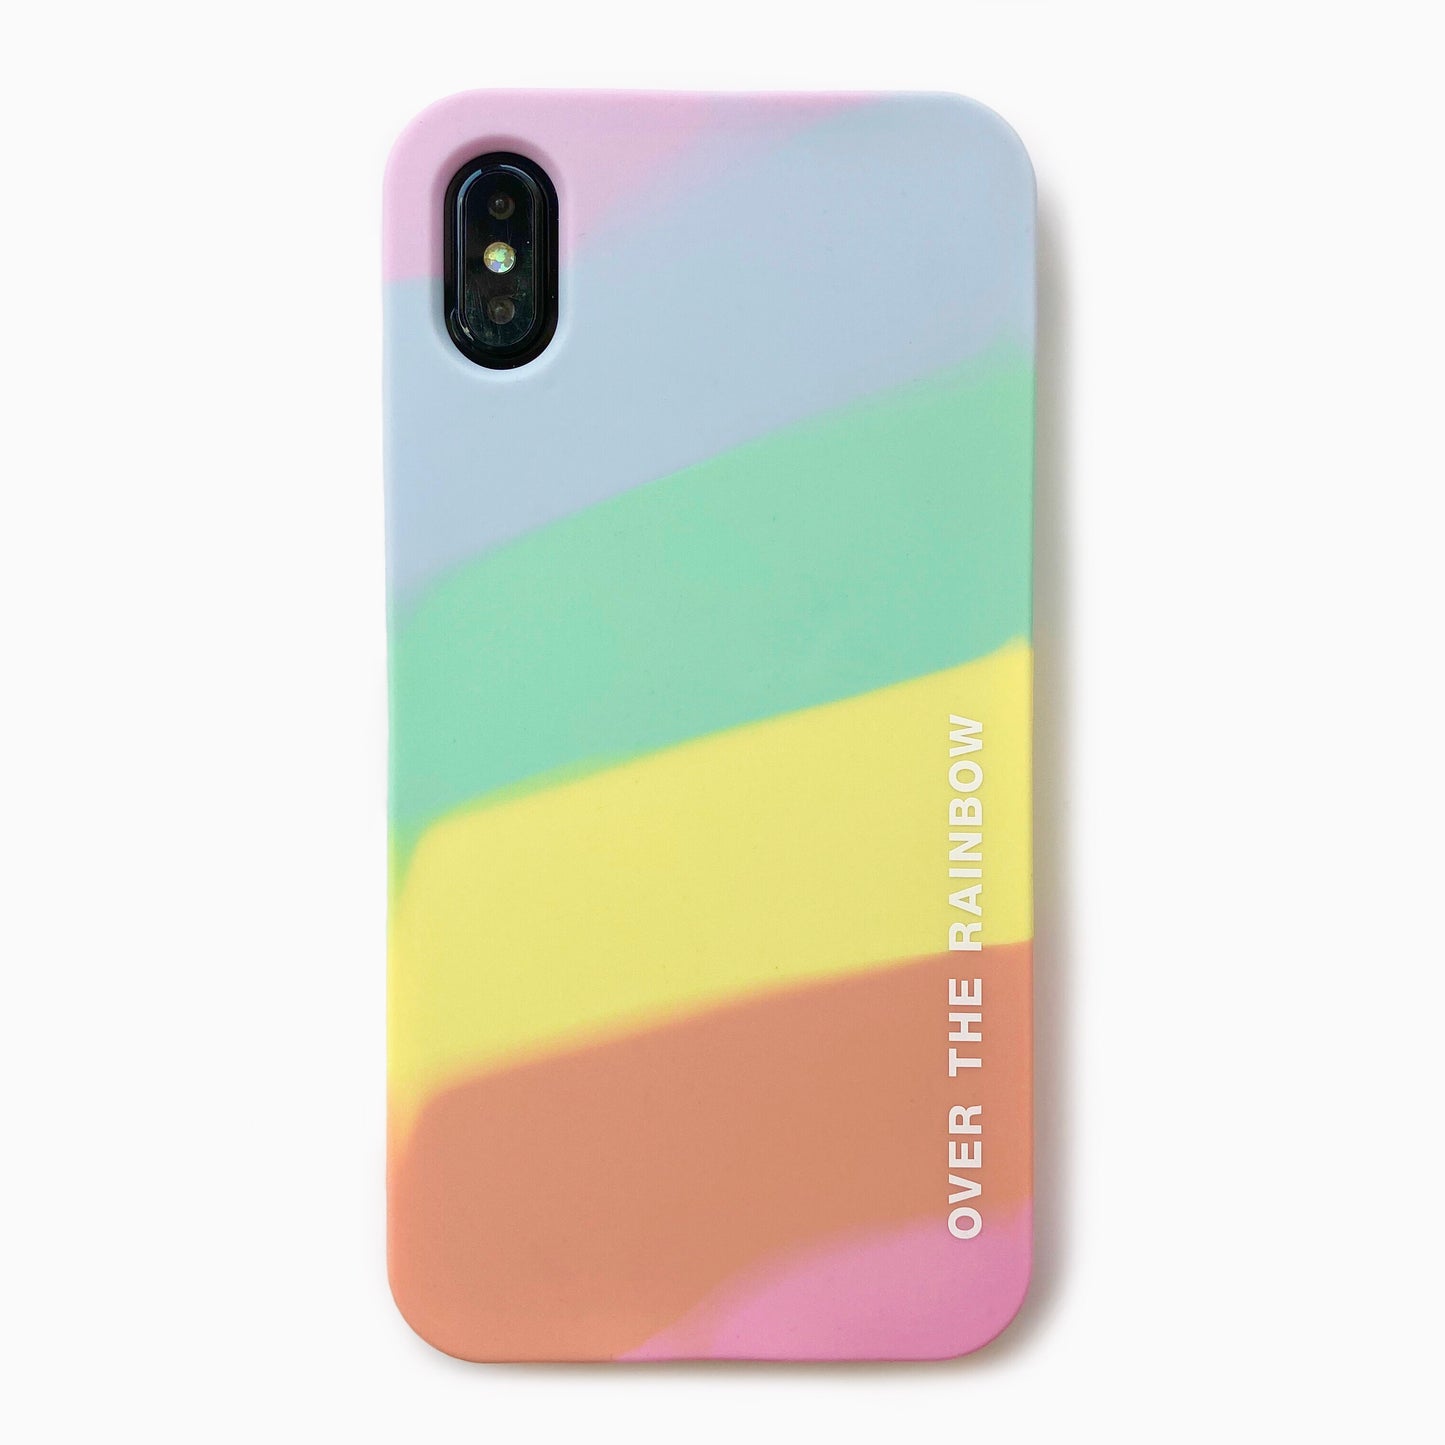 iPhone XS Max simple case - OVER THE RAINBOW (Pastel)